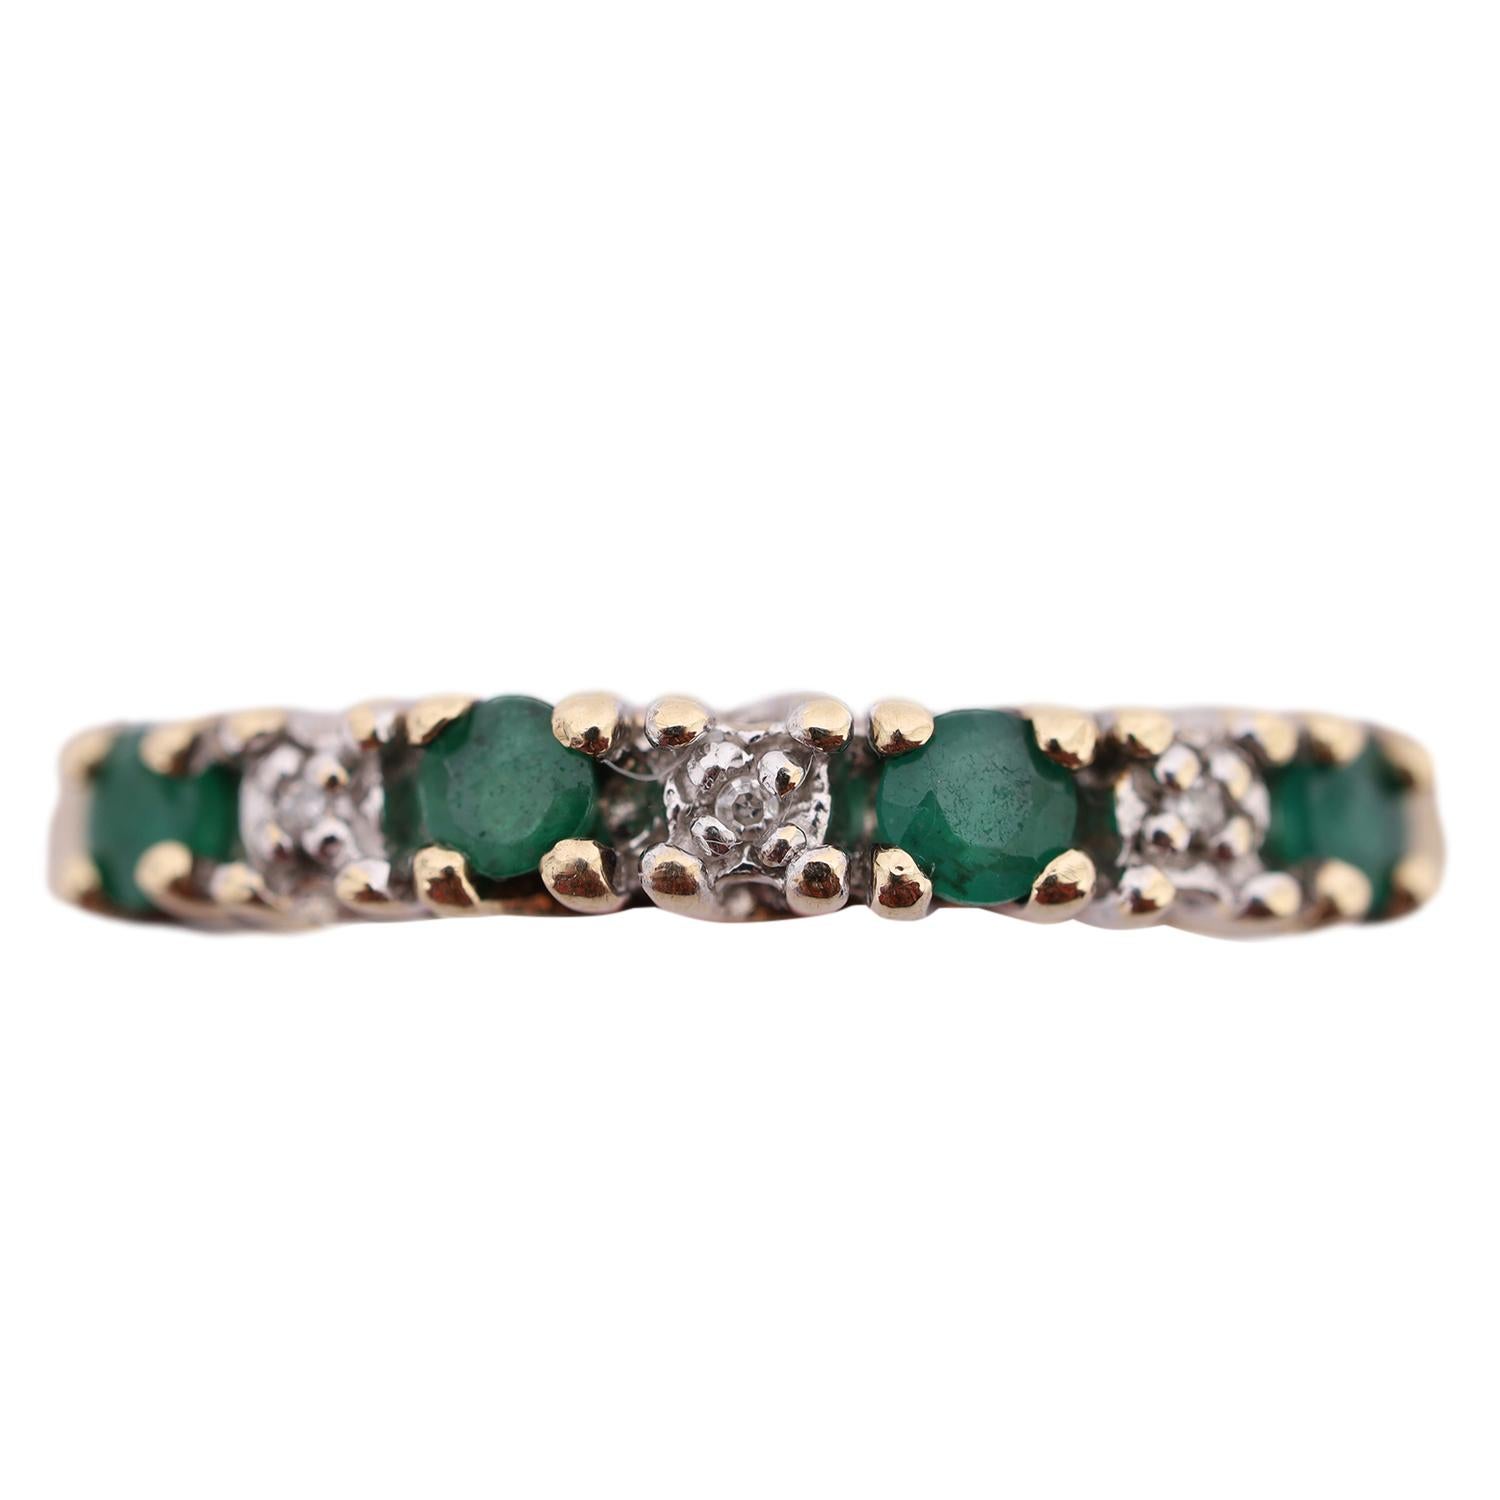 Curated by The Lady Bag Ladies 

10Kt Yellow Gold Natural Emerald and Diamond Stacking Ring.

The ring features 4 total emeralds and 3 diamonds, all round cut and prong set. The diamonds all measure approximately .8mm each, while the natural